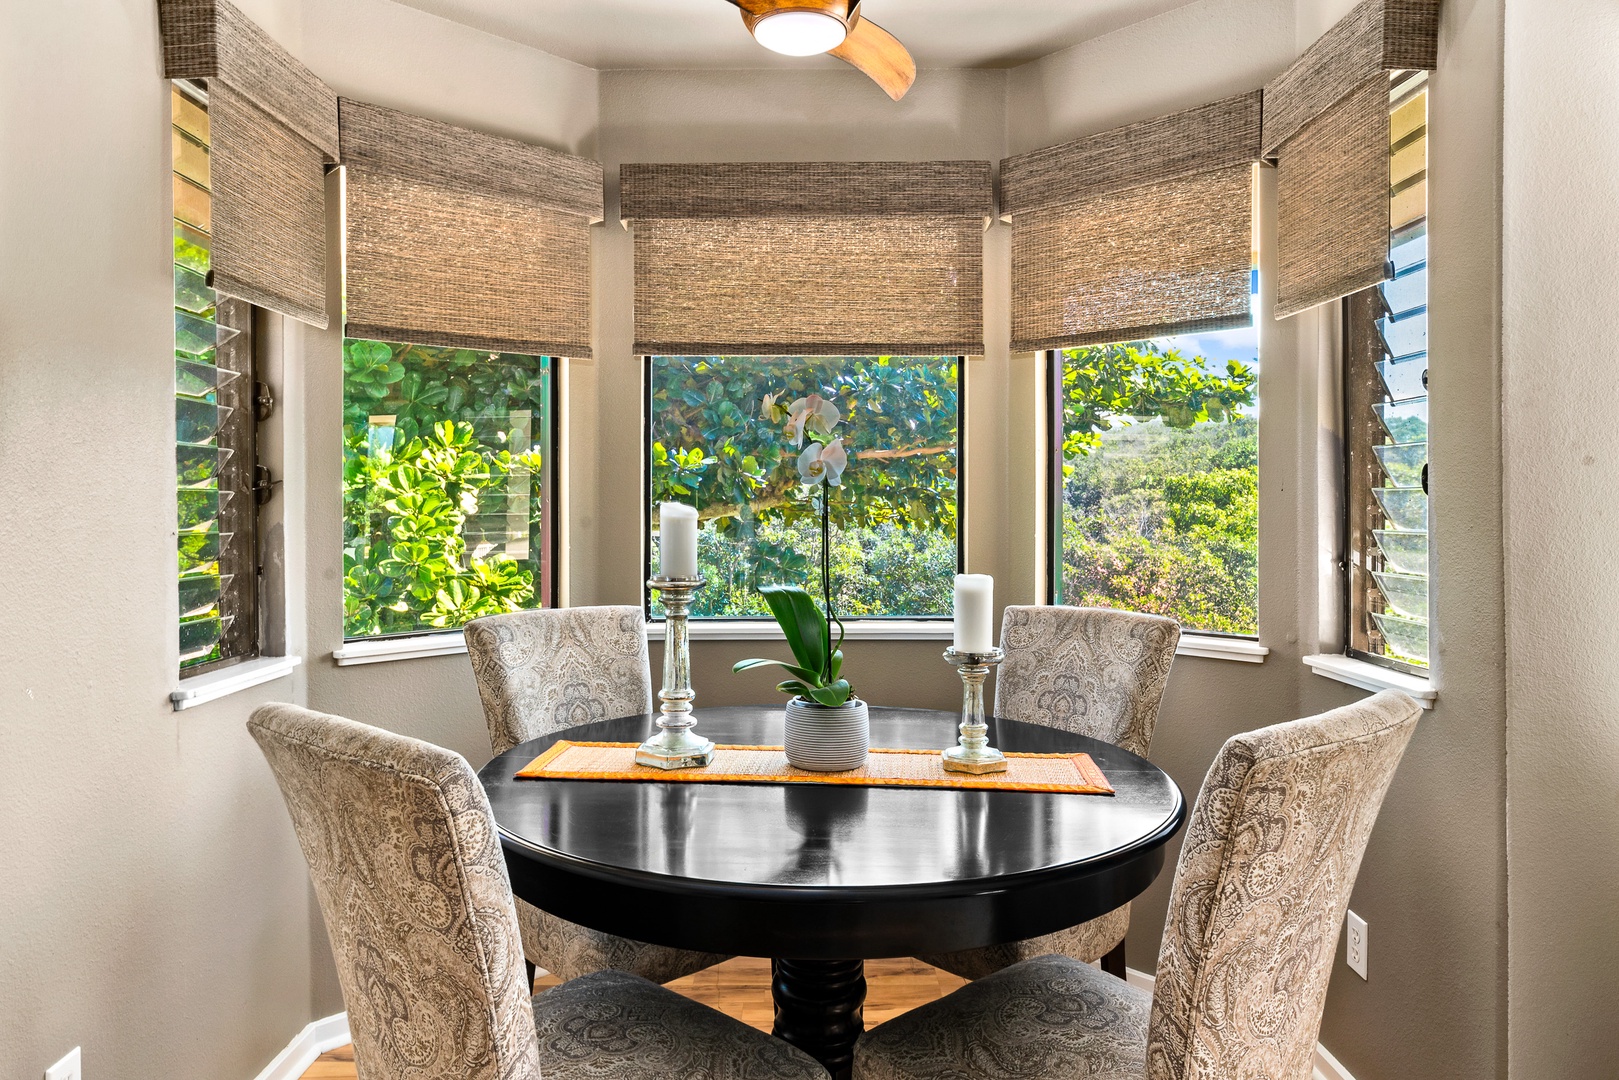 Princeville Vacation Rentals, Makanalani - Elegant dining nook with lush views, perfect for serene breakfasts and intimate dinners amidst the beauty of nature.